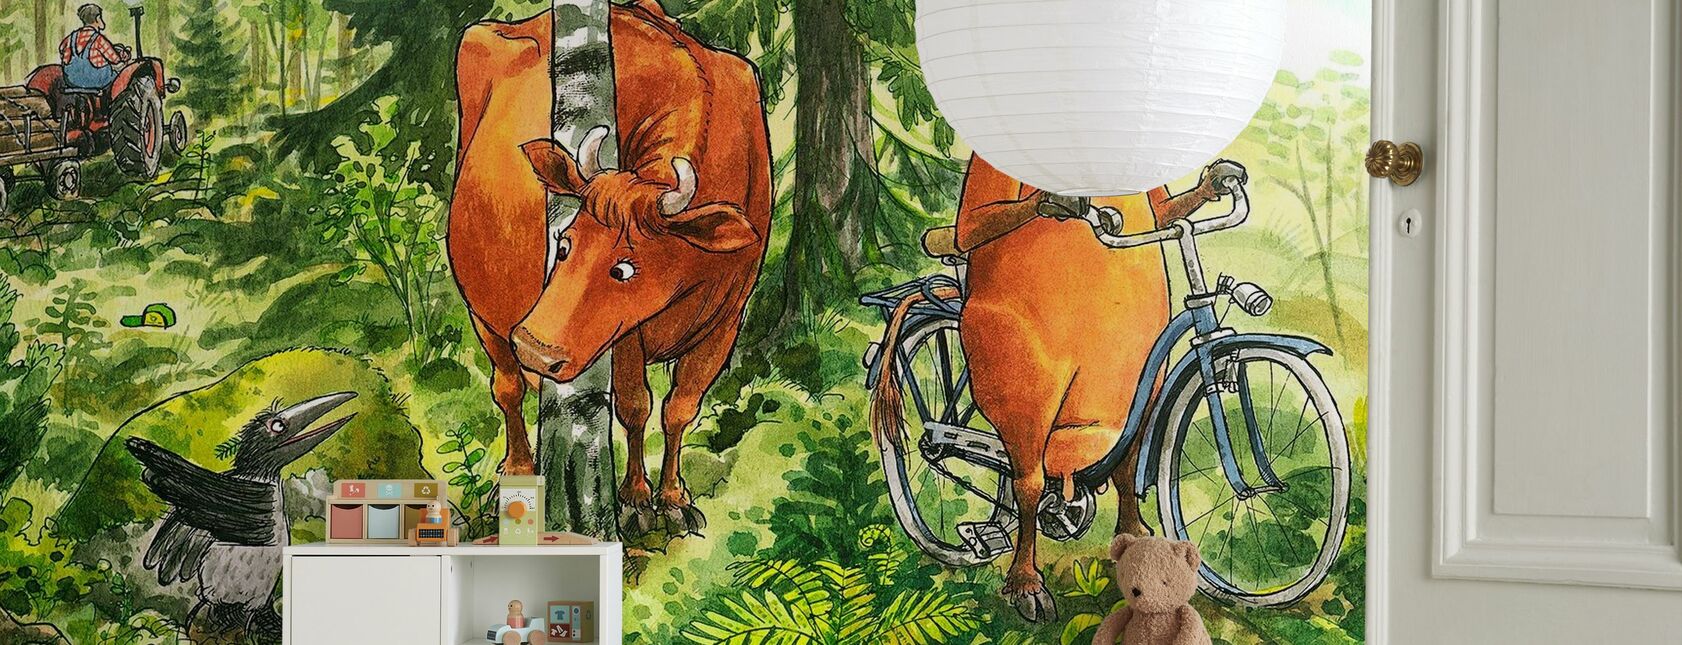 Mom Mu & Crow - What knows a cow - Wallpaper - Kids Room